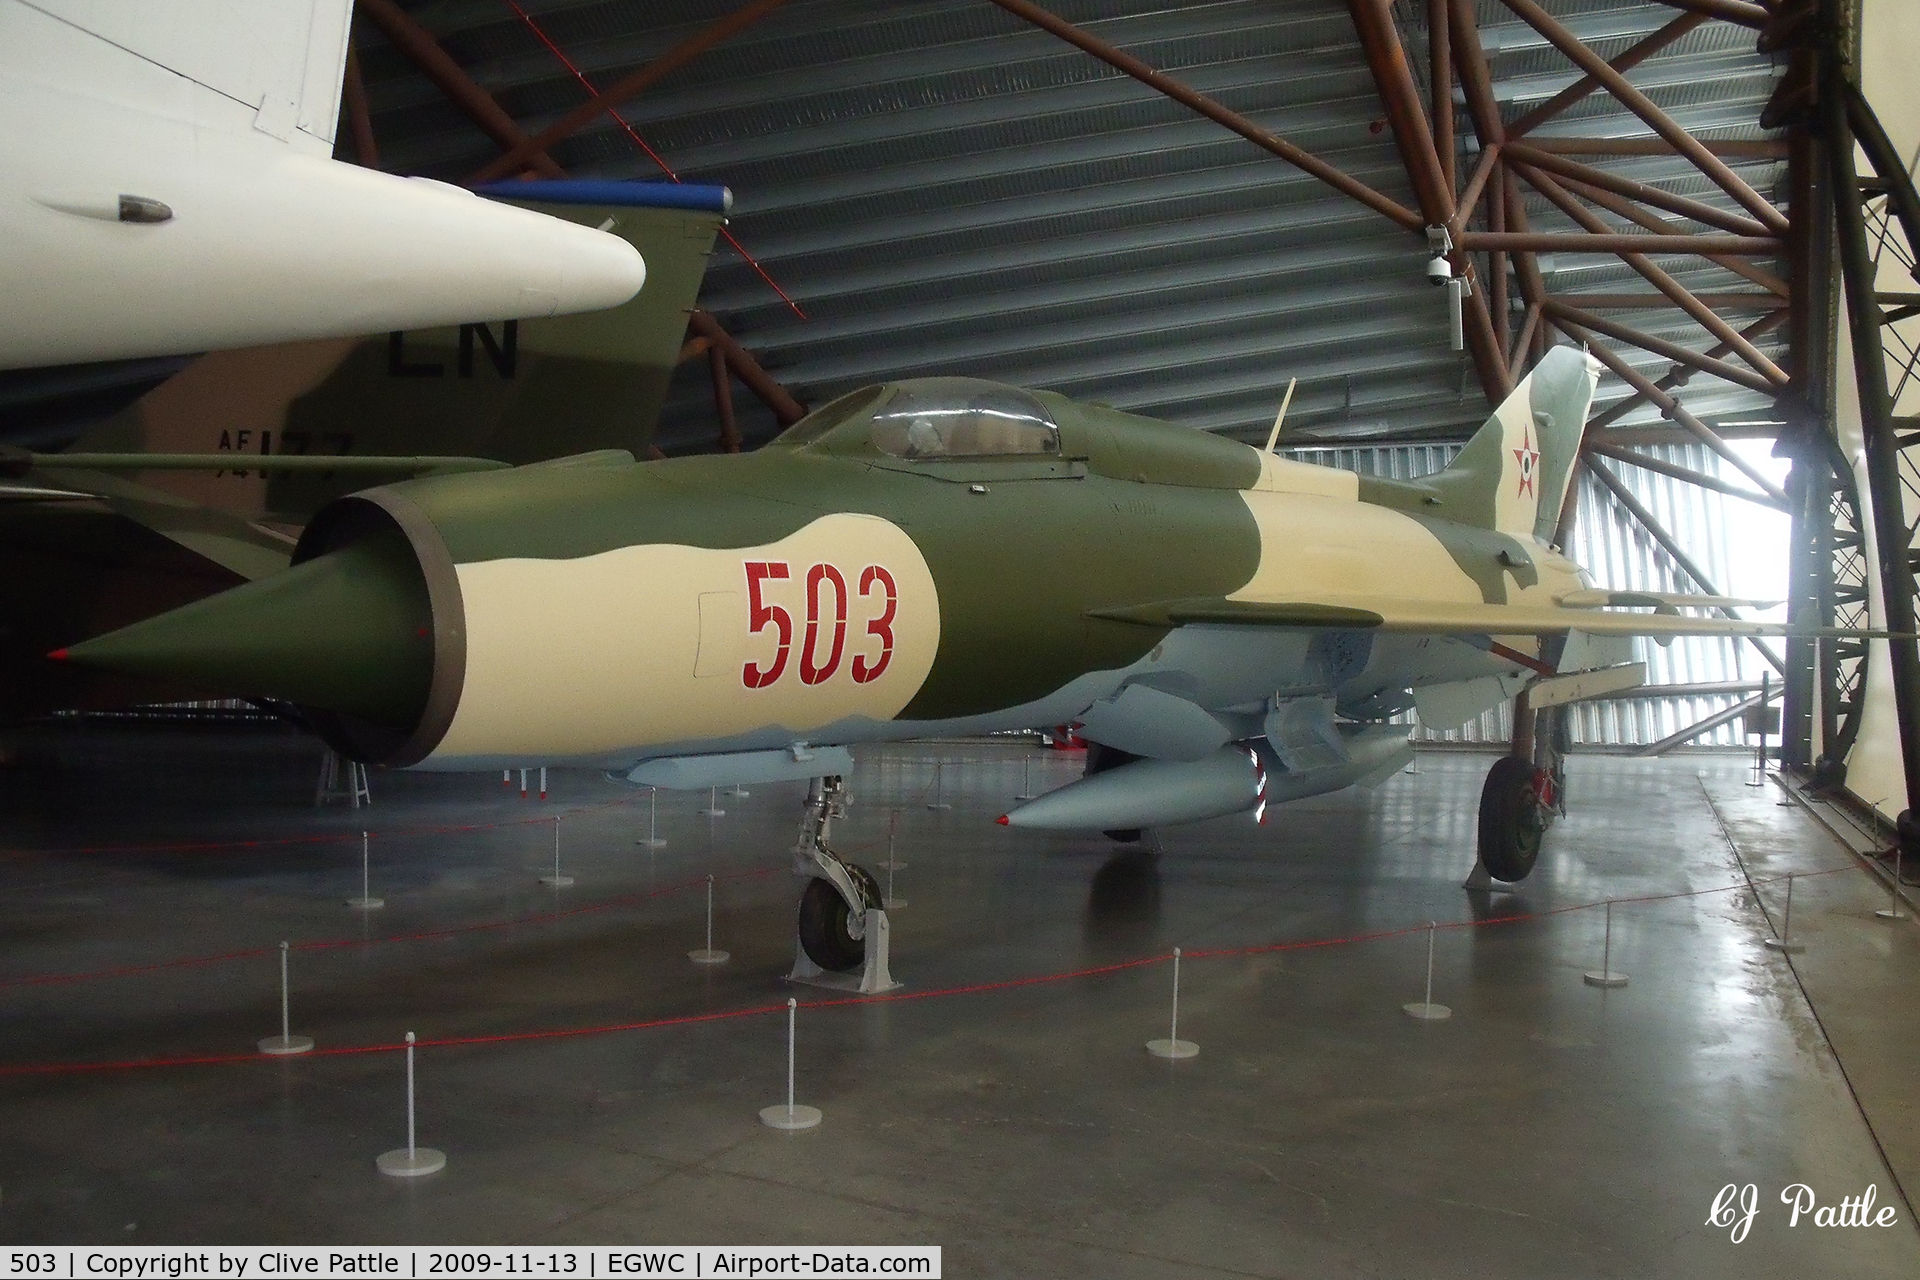 503, 1966 Mikoyan-Gurevich MiG-21PF C/N 760503, Preserved within the Royal Air Museum at RAF Cosford EGWC.